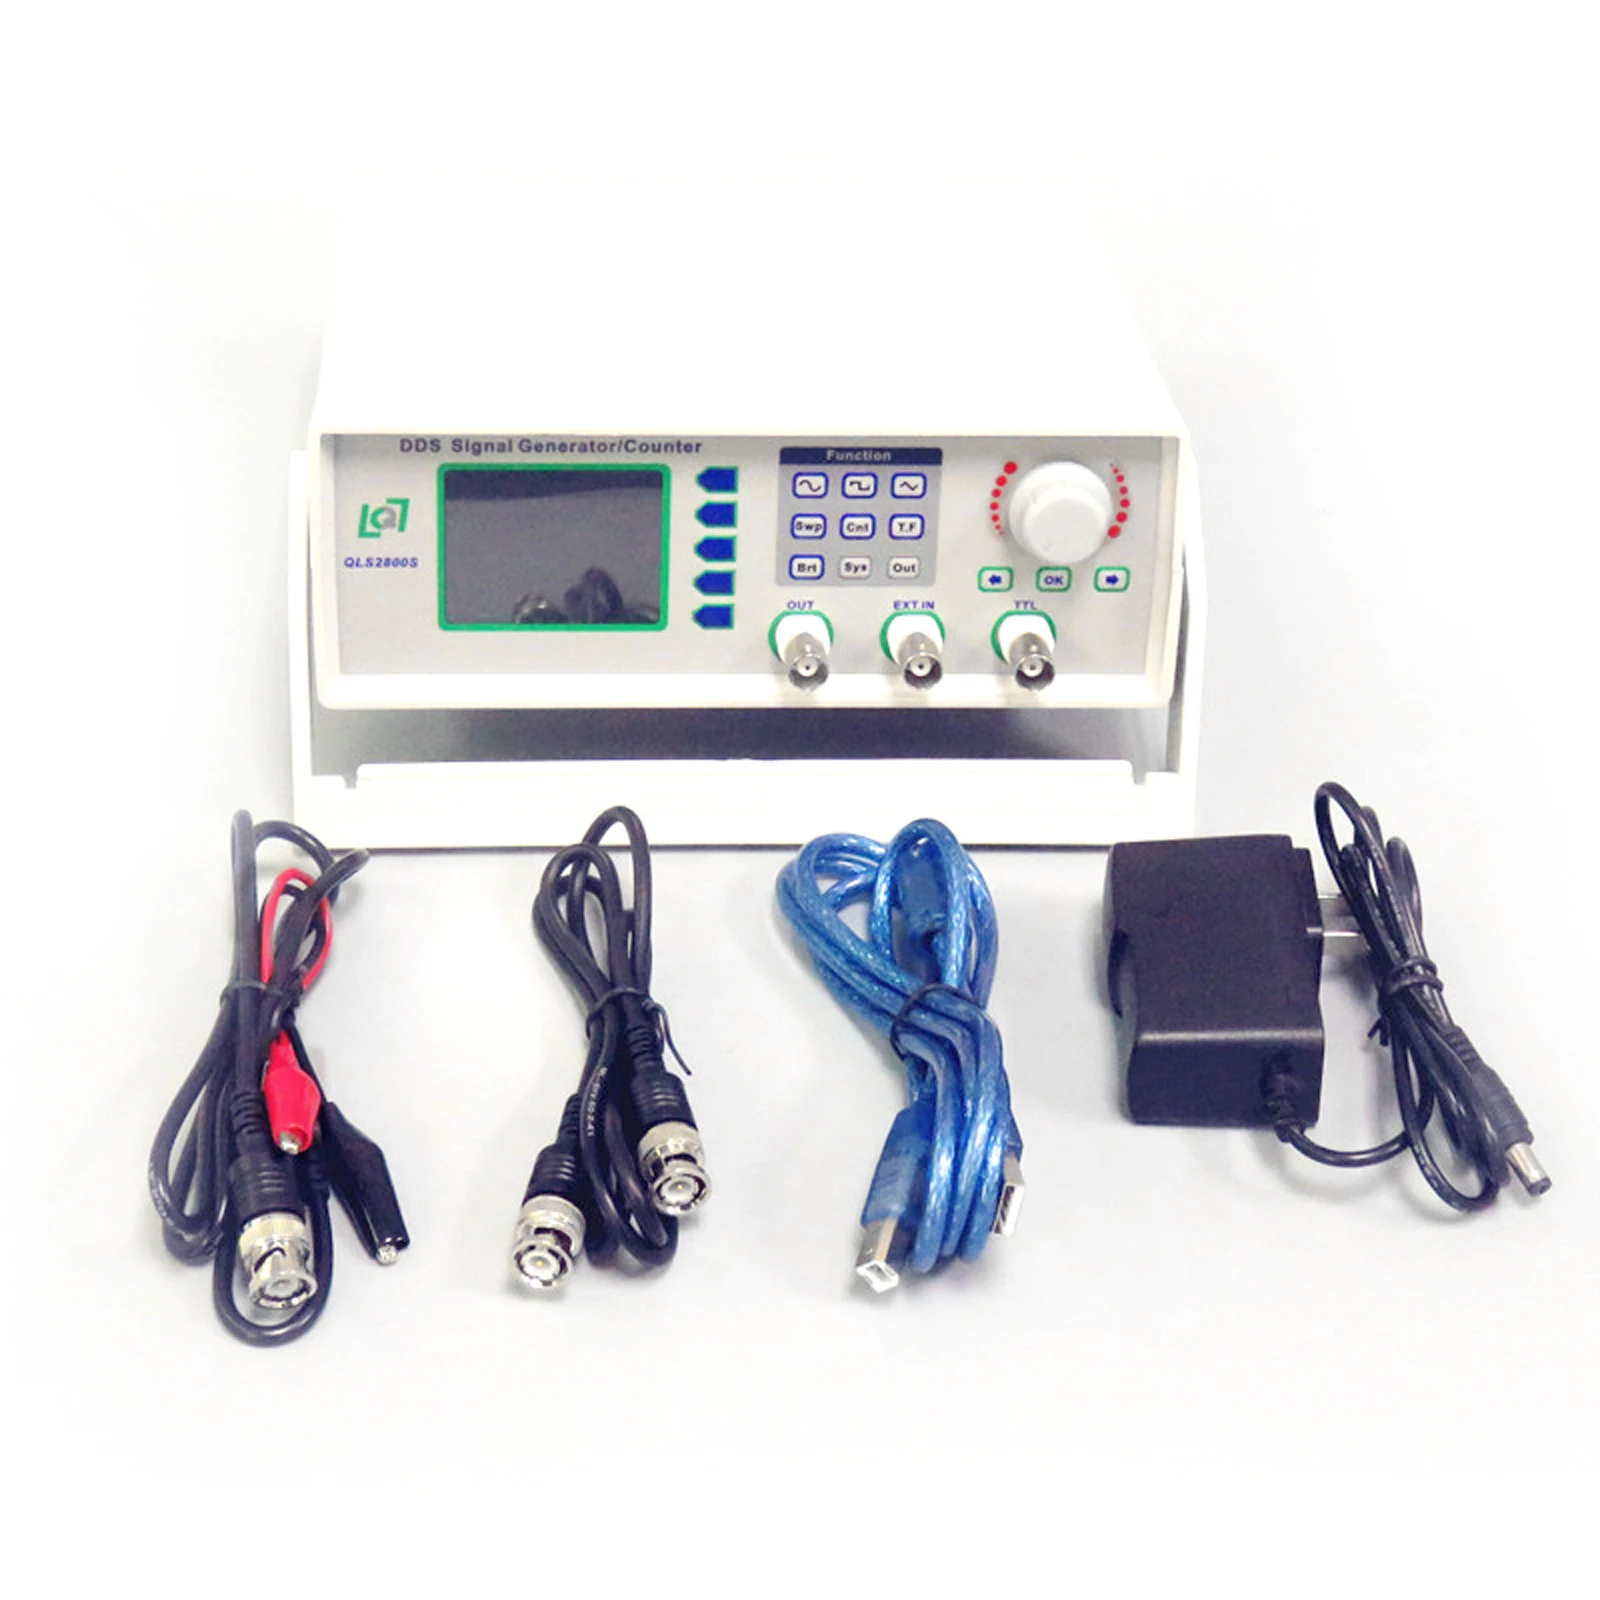 DDS Function Signal Generator Frequency Counter Sine Square Wave QLS2800-5M 